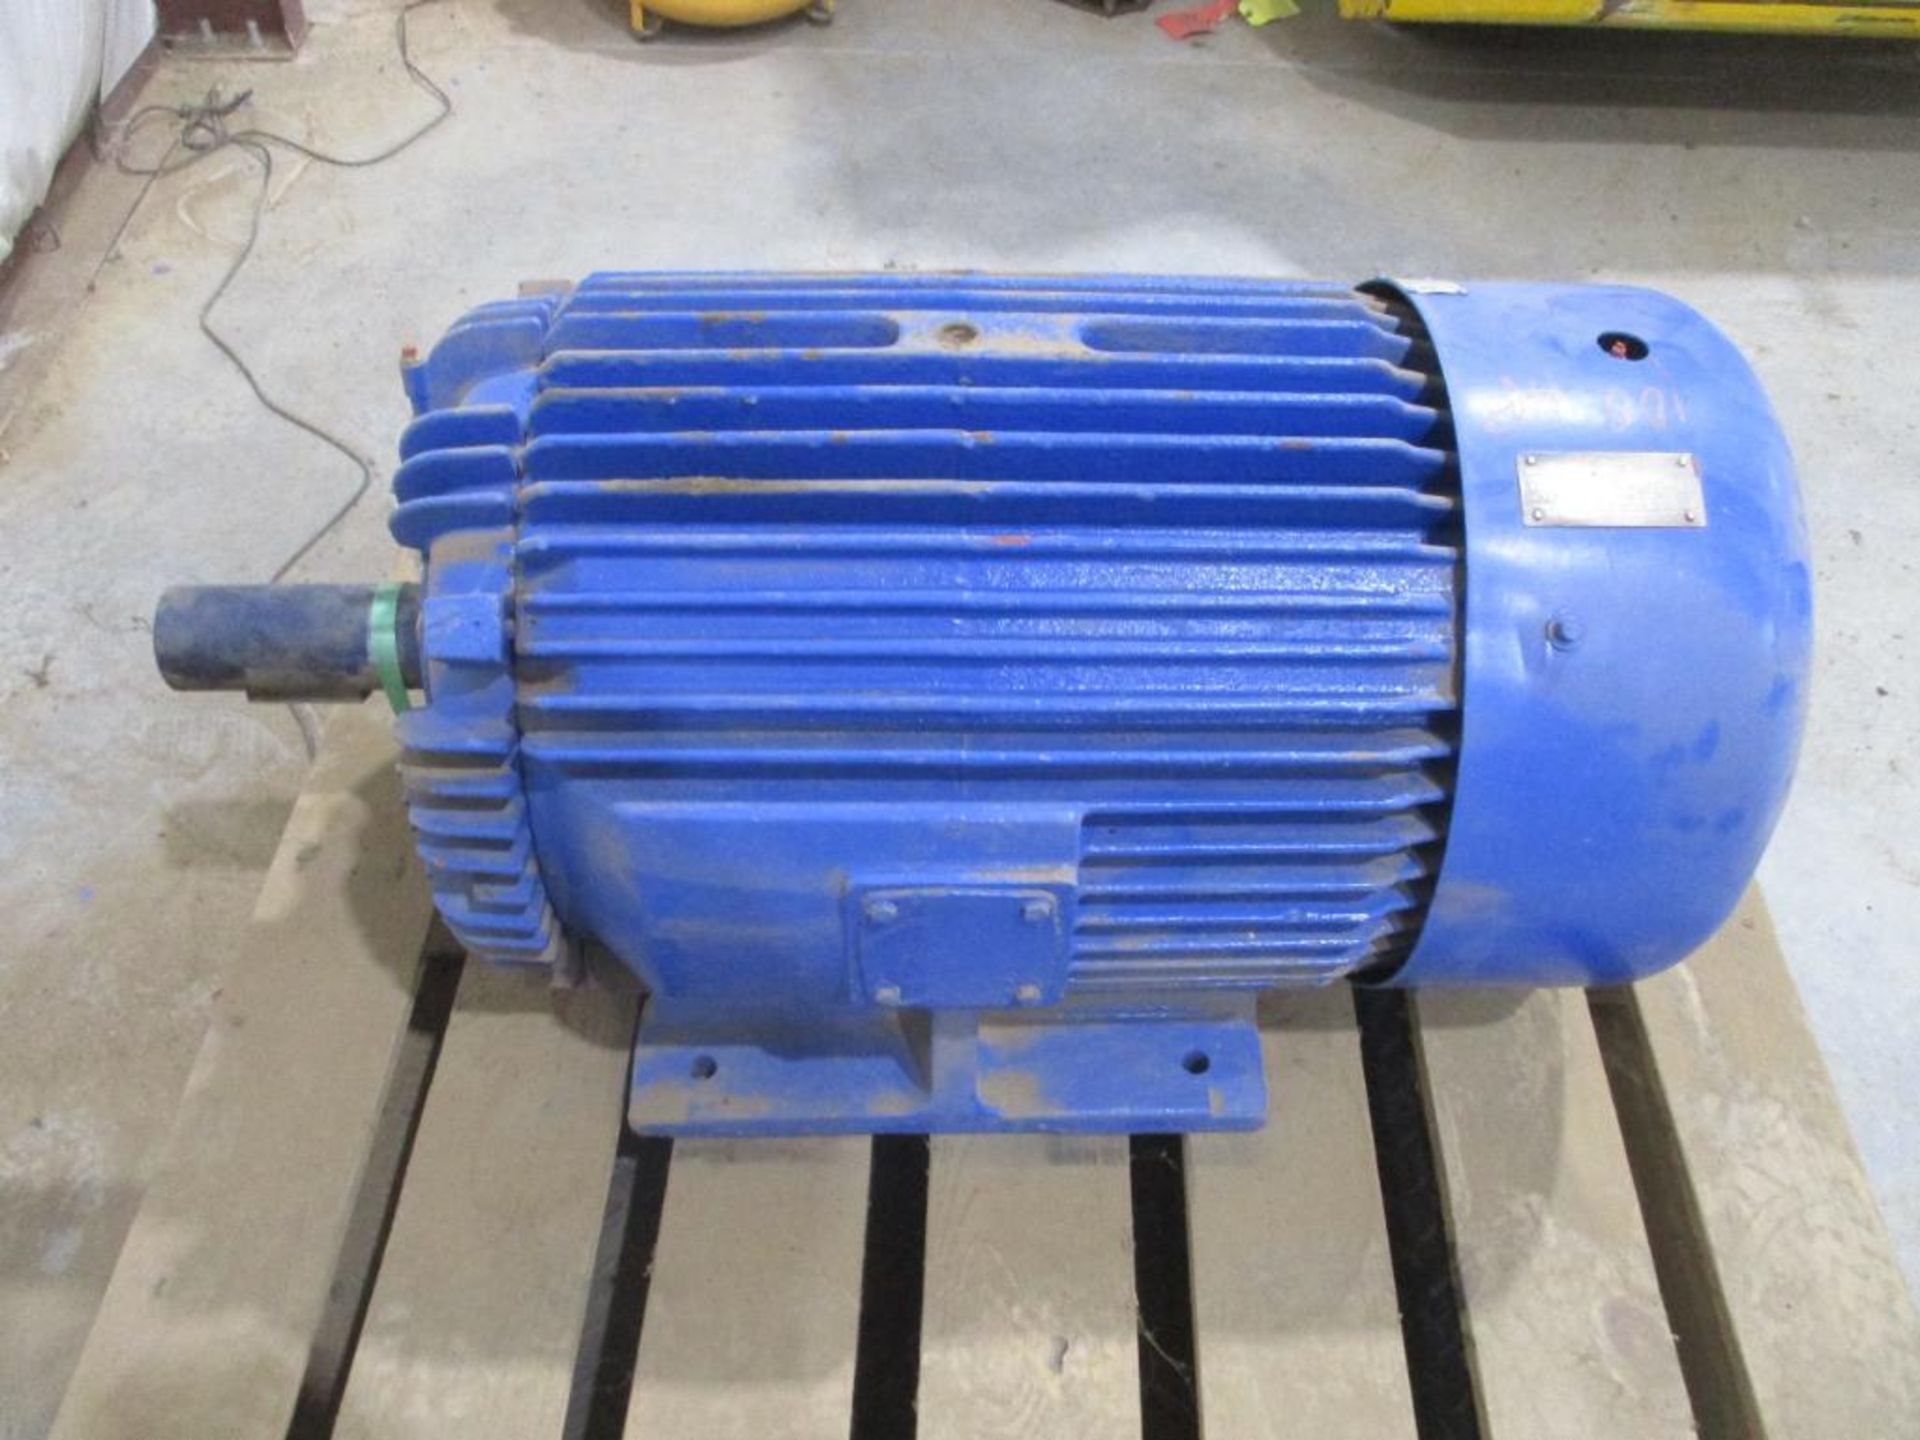 TOSHIBA 3 PHASE 100HP 1760RPM 405T FRAME A/C MOTOR P/N B1004FFF3A3, 1246# lbs (There will be a $40 R - Image 3 of 6